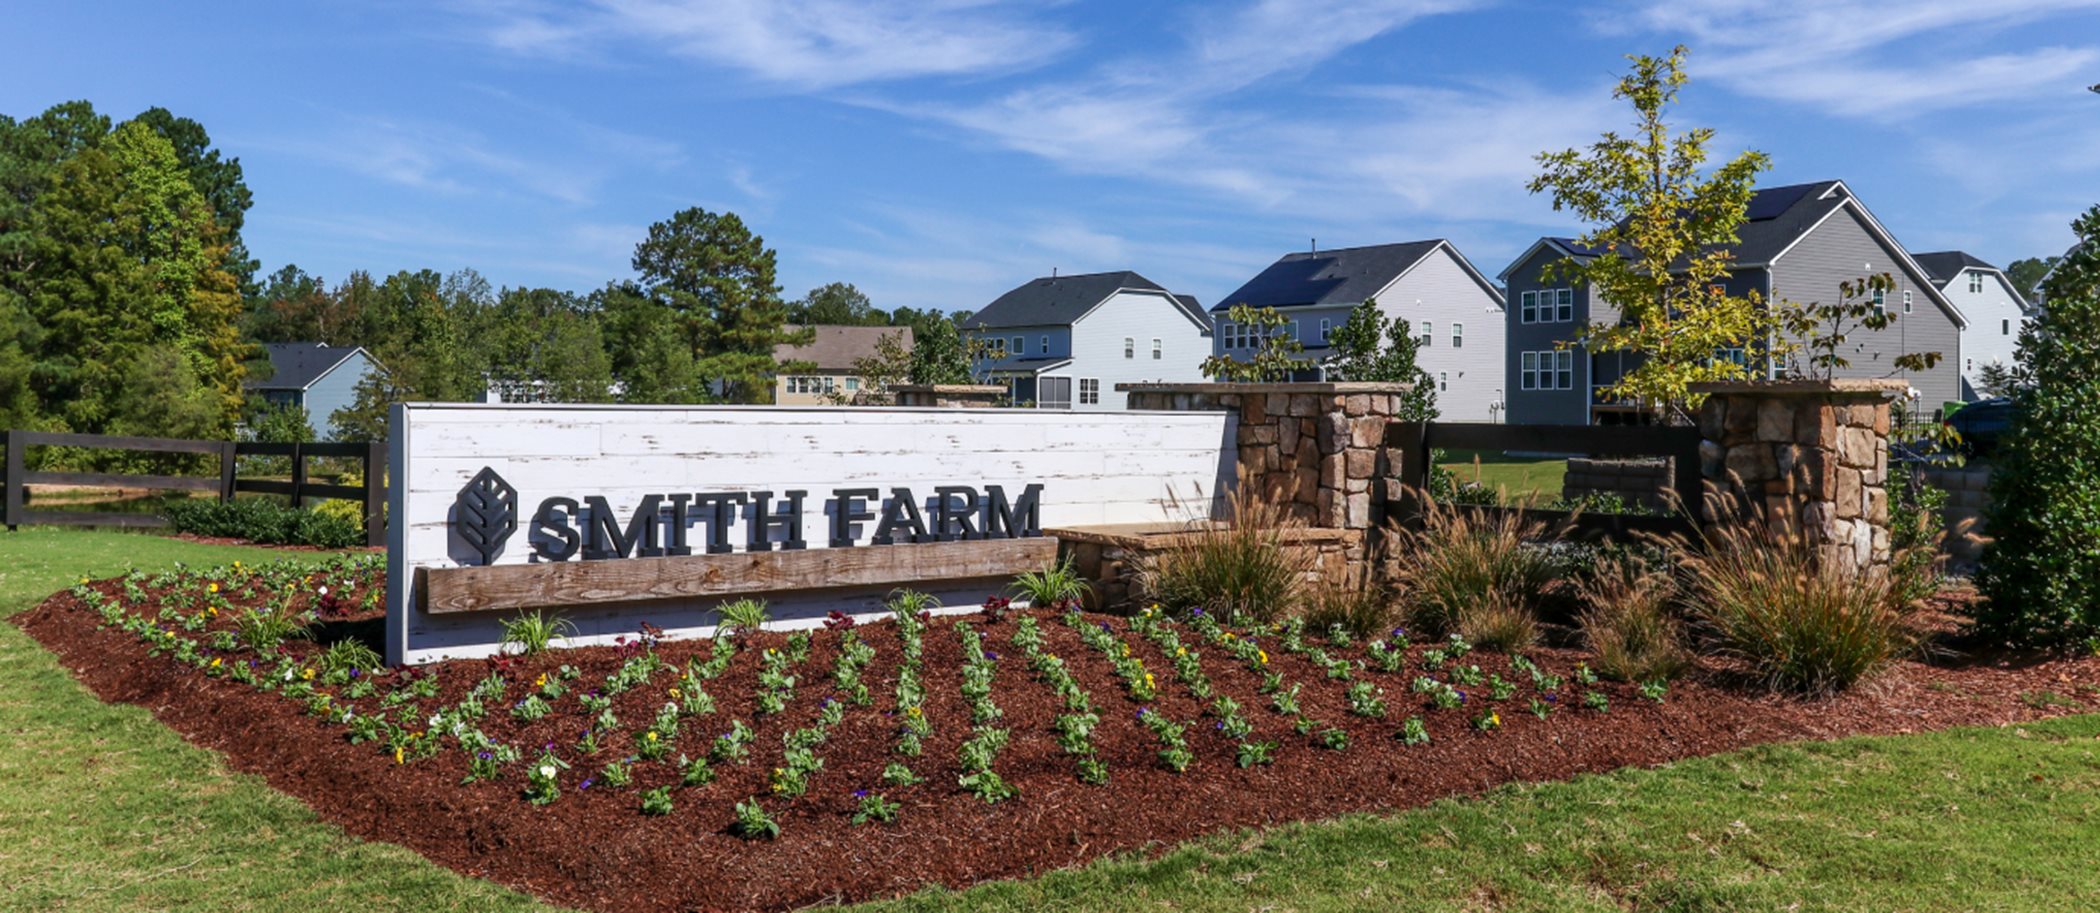 Welcome to Smith Farm